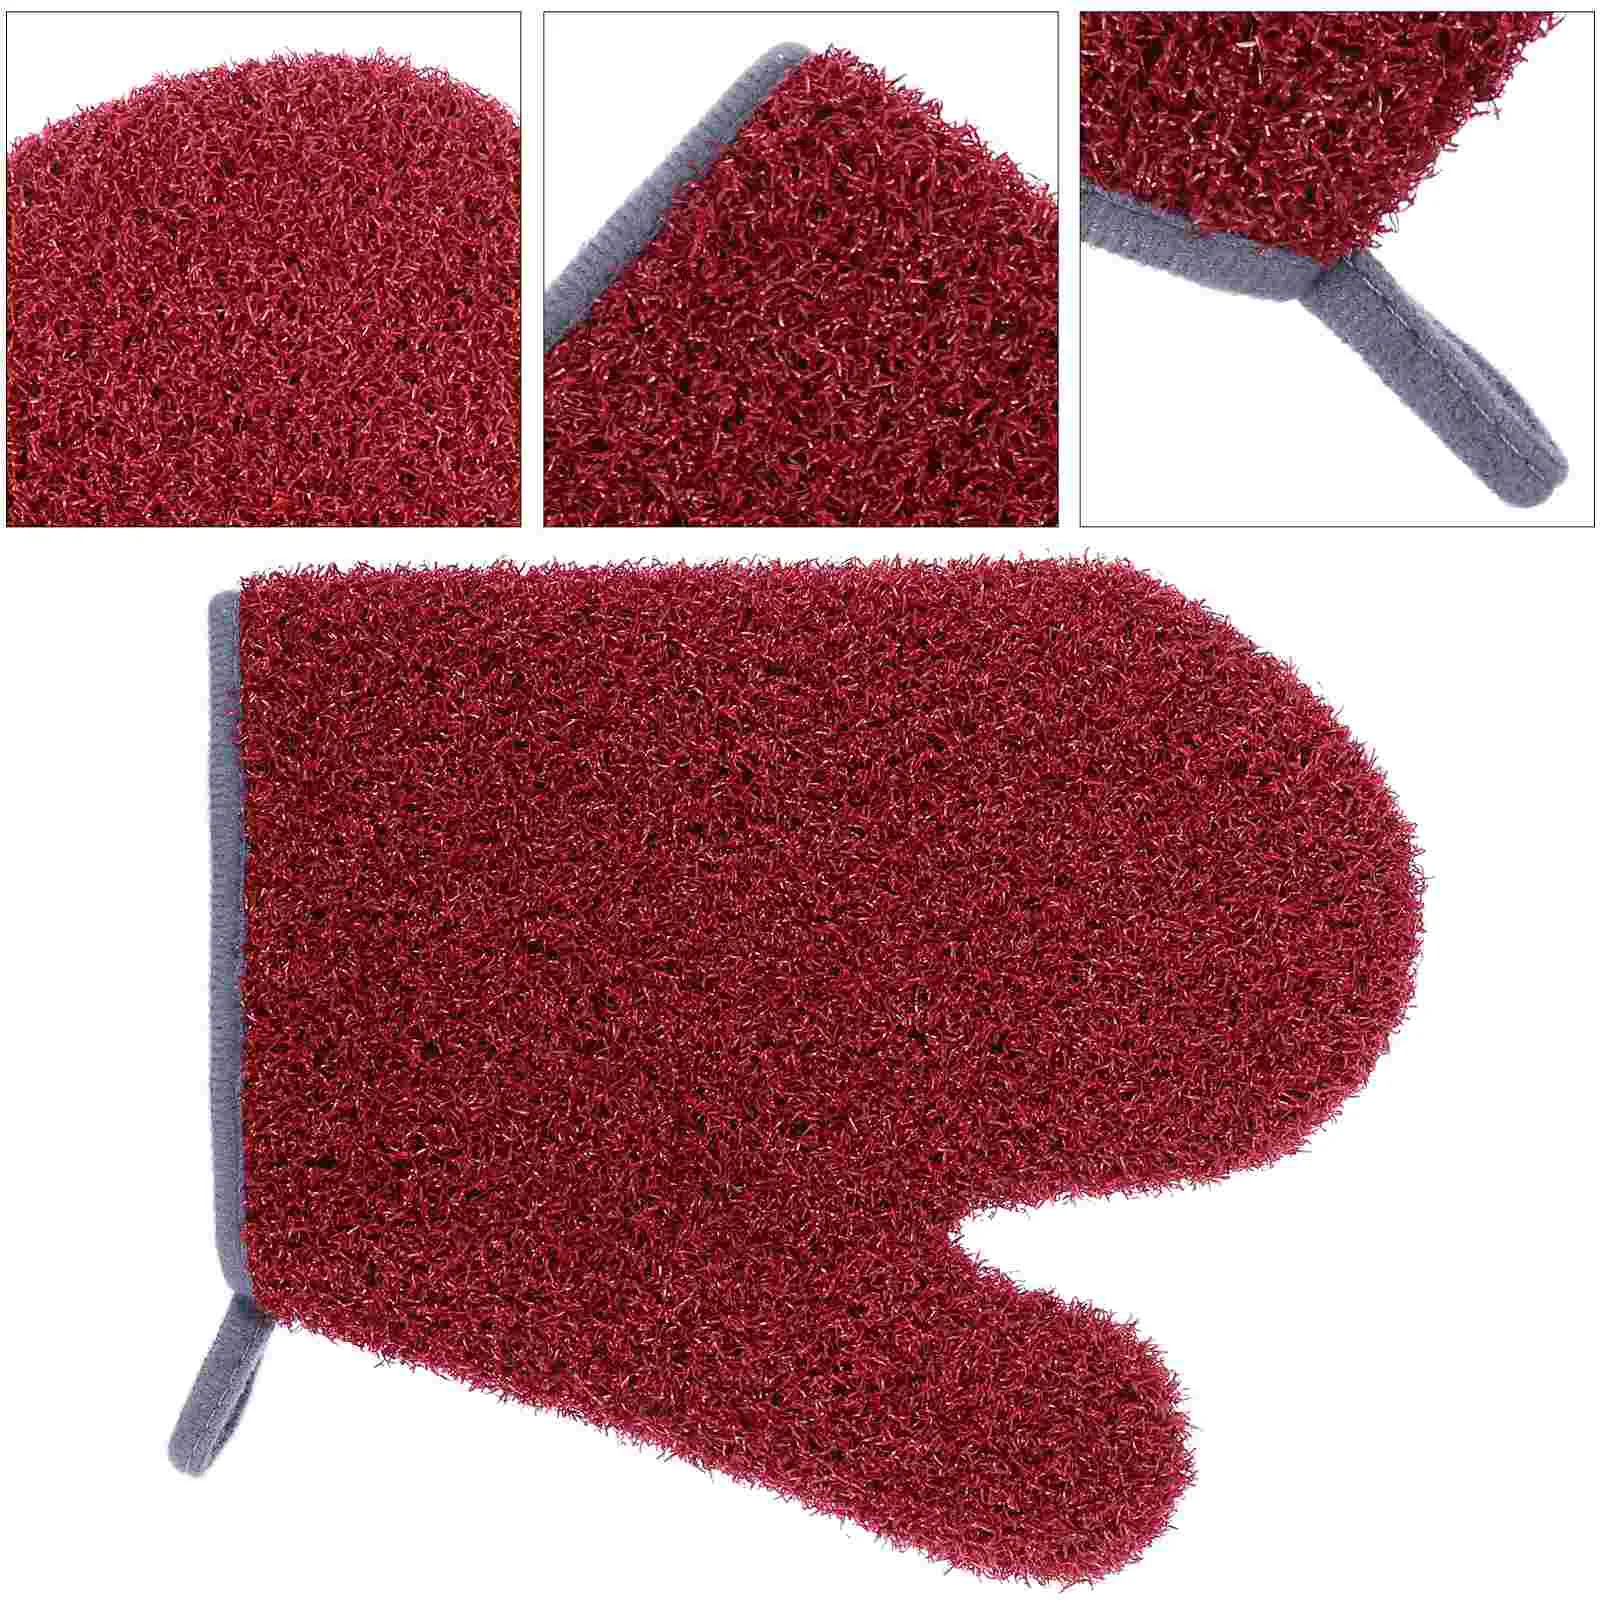 

Professional Swimming Pool Cleaning Scrubber Glove Spa Tub Hot Tub Cleaning Mitt